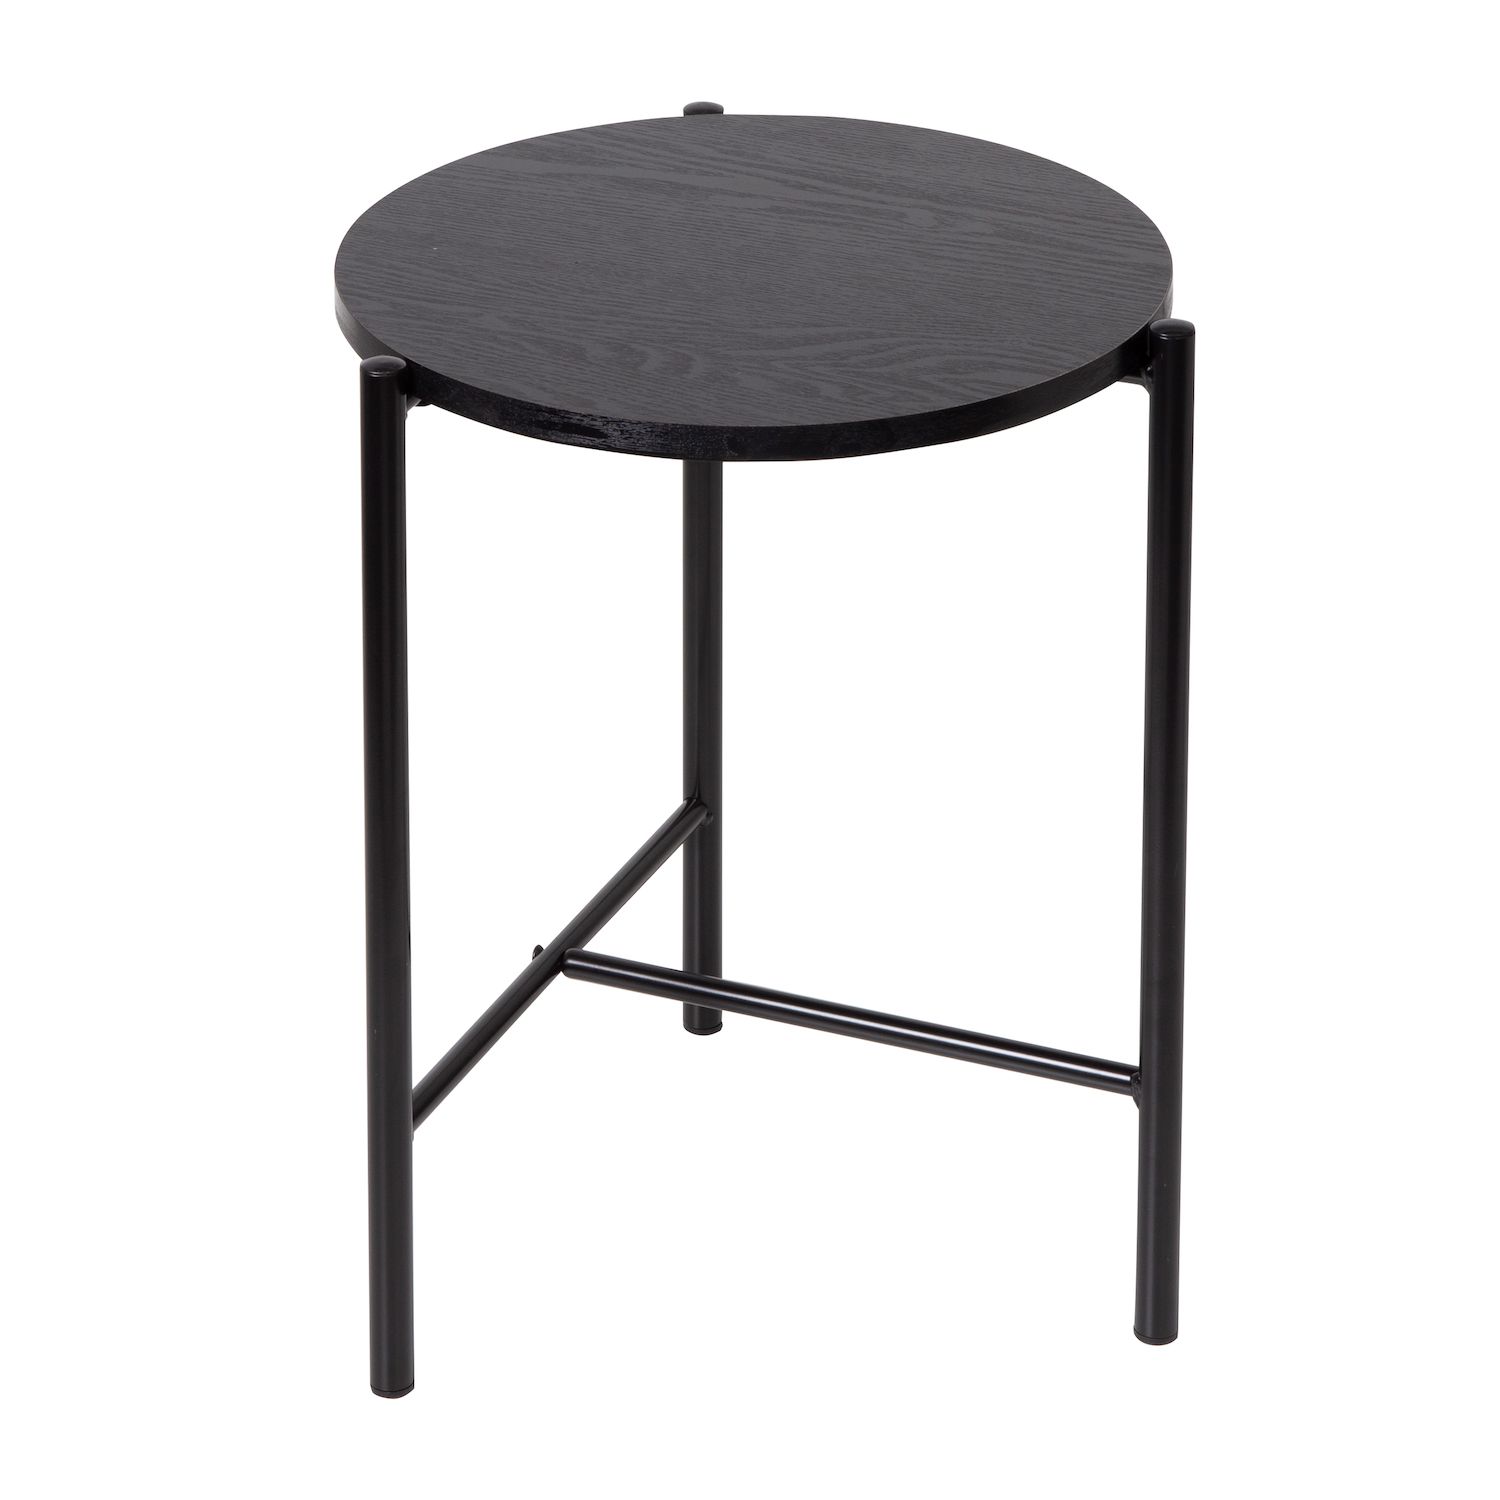 Image for Honey-Can-Do Round End Table at Kohl's.